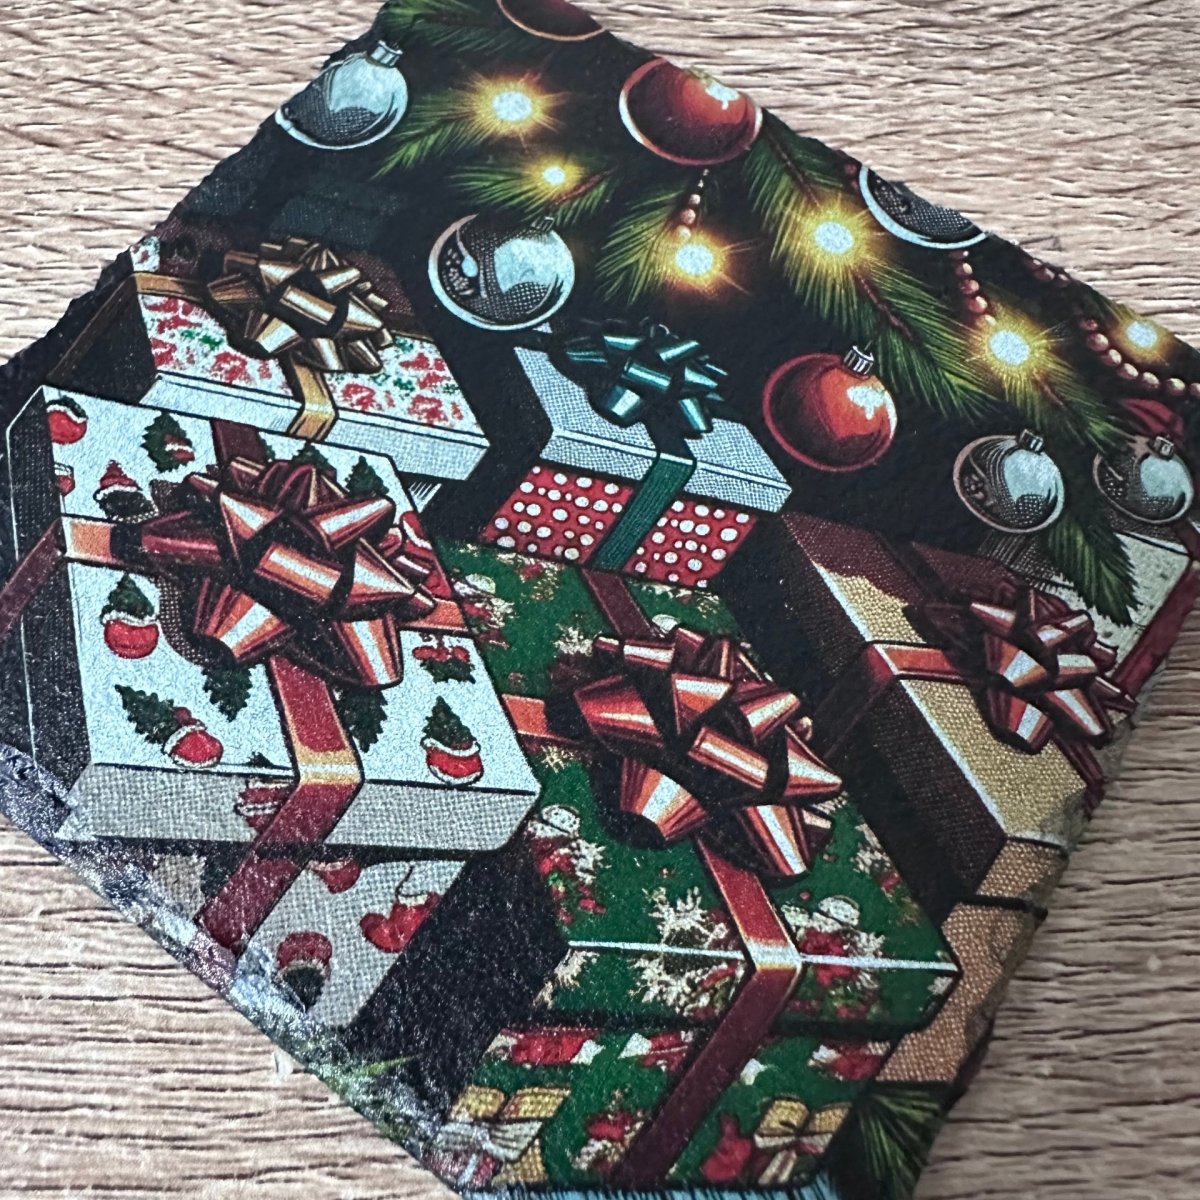 Christmas Slate Coasters - Gifts Under The tree #2 - GameOn.games